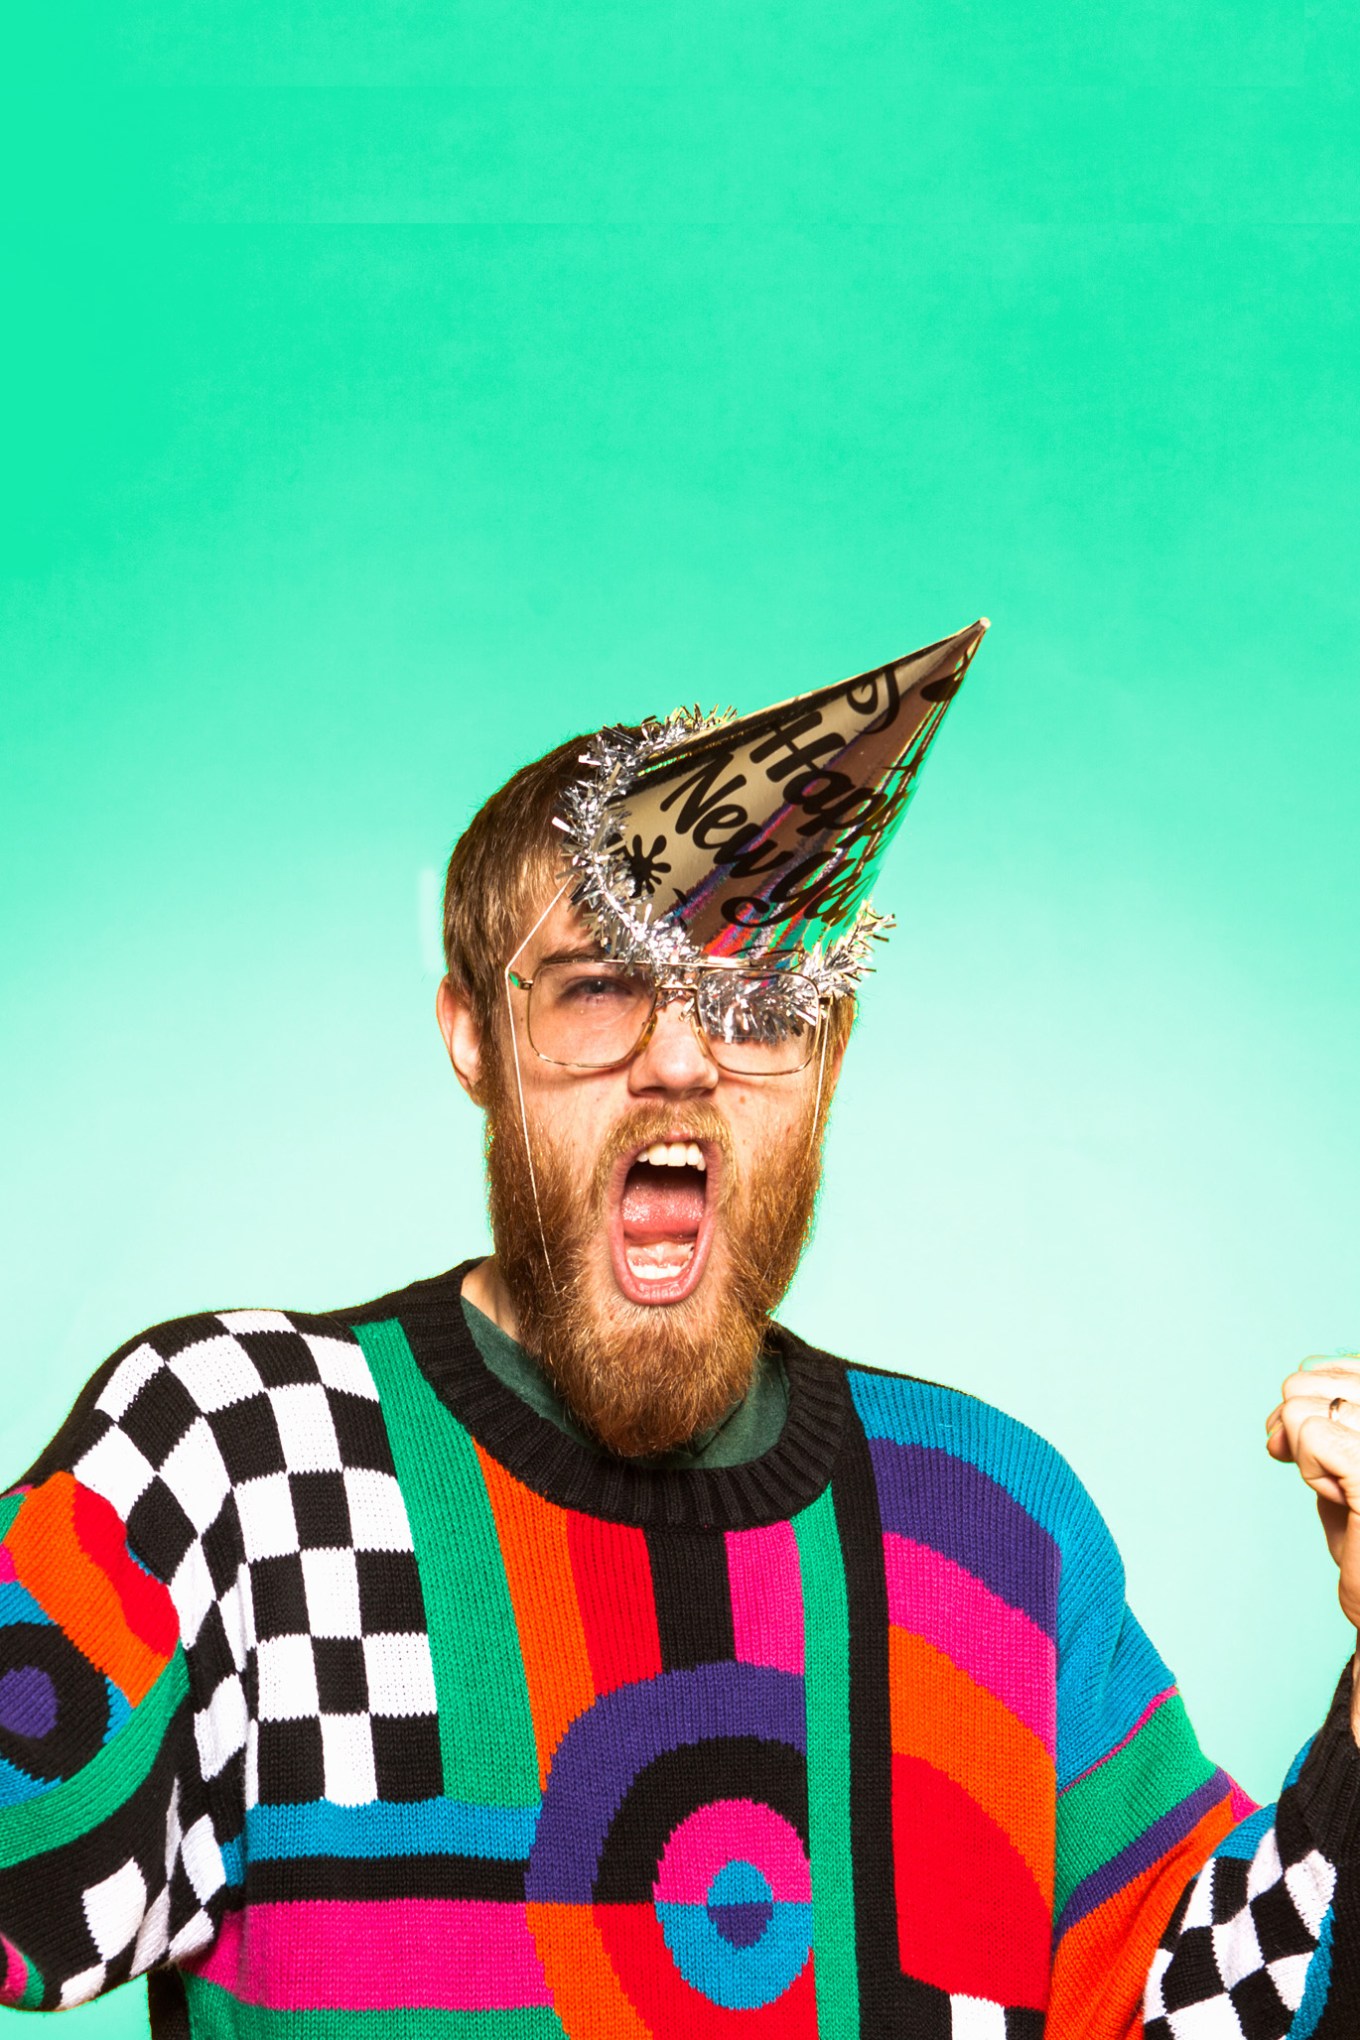 Bearded man in ugly sweater with New Year's party hat